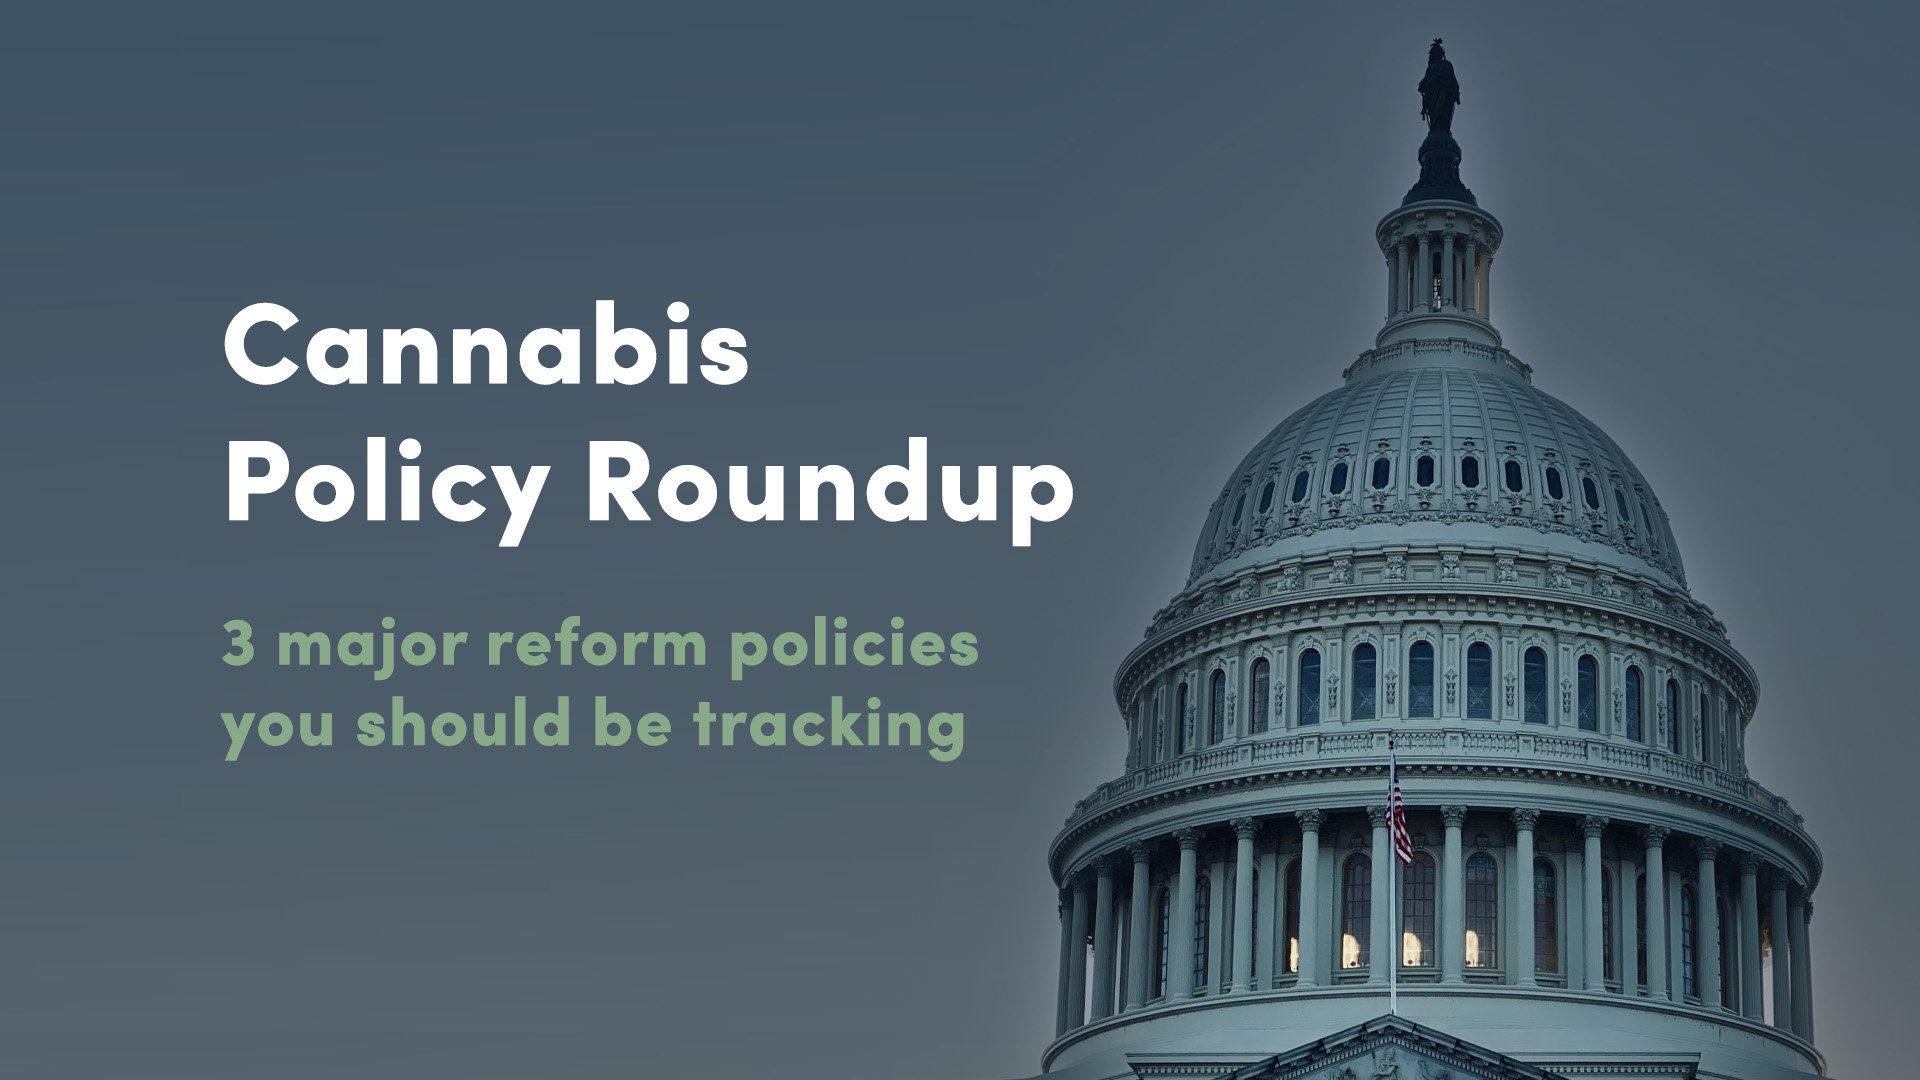 Cannabis Policy Roundup: 3 major reform policies you should be tracking